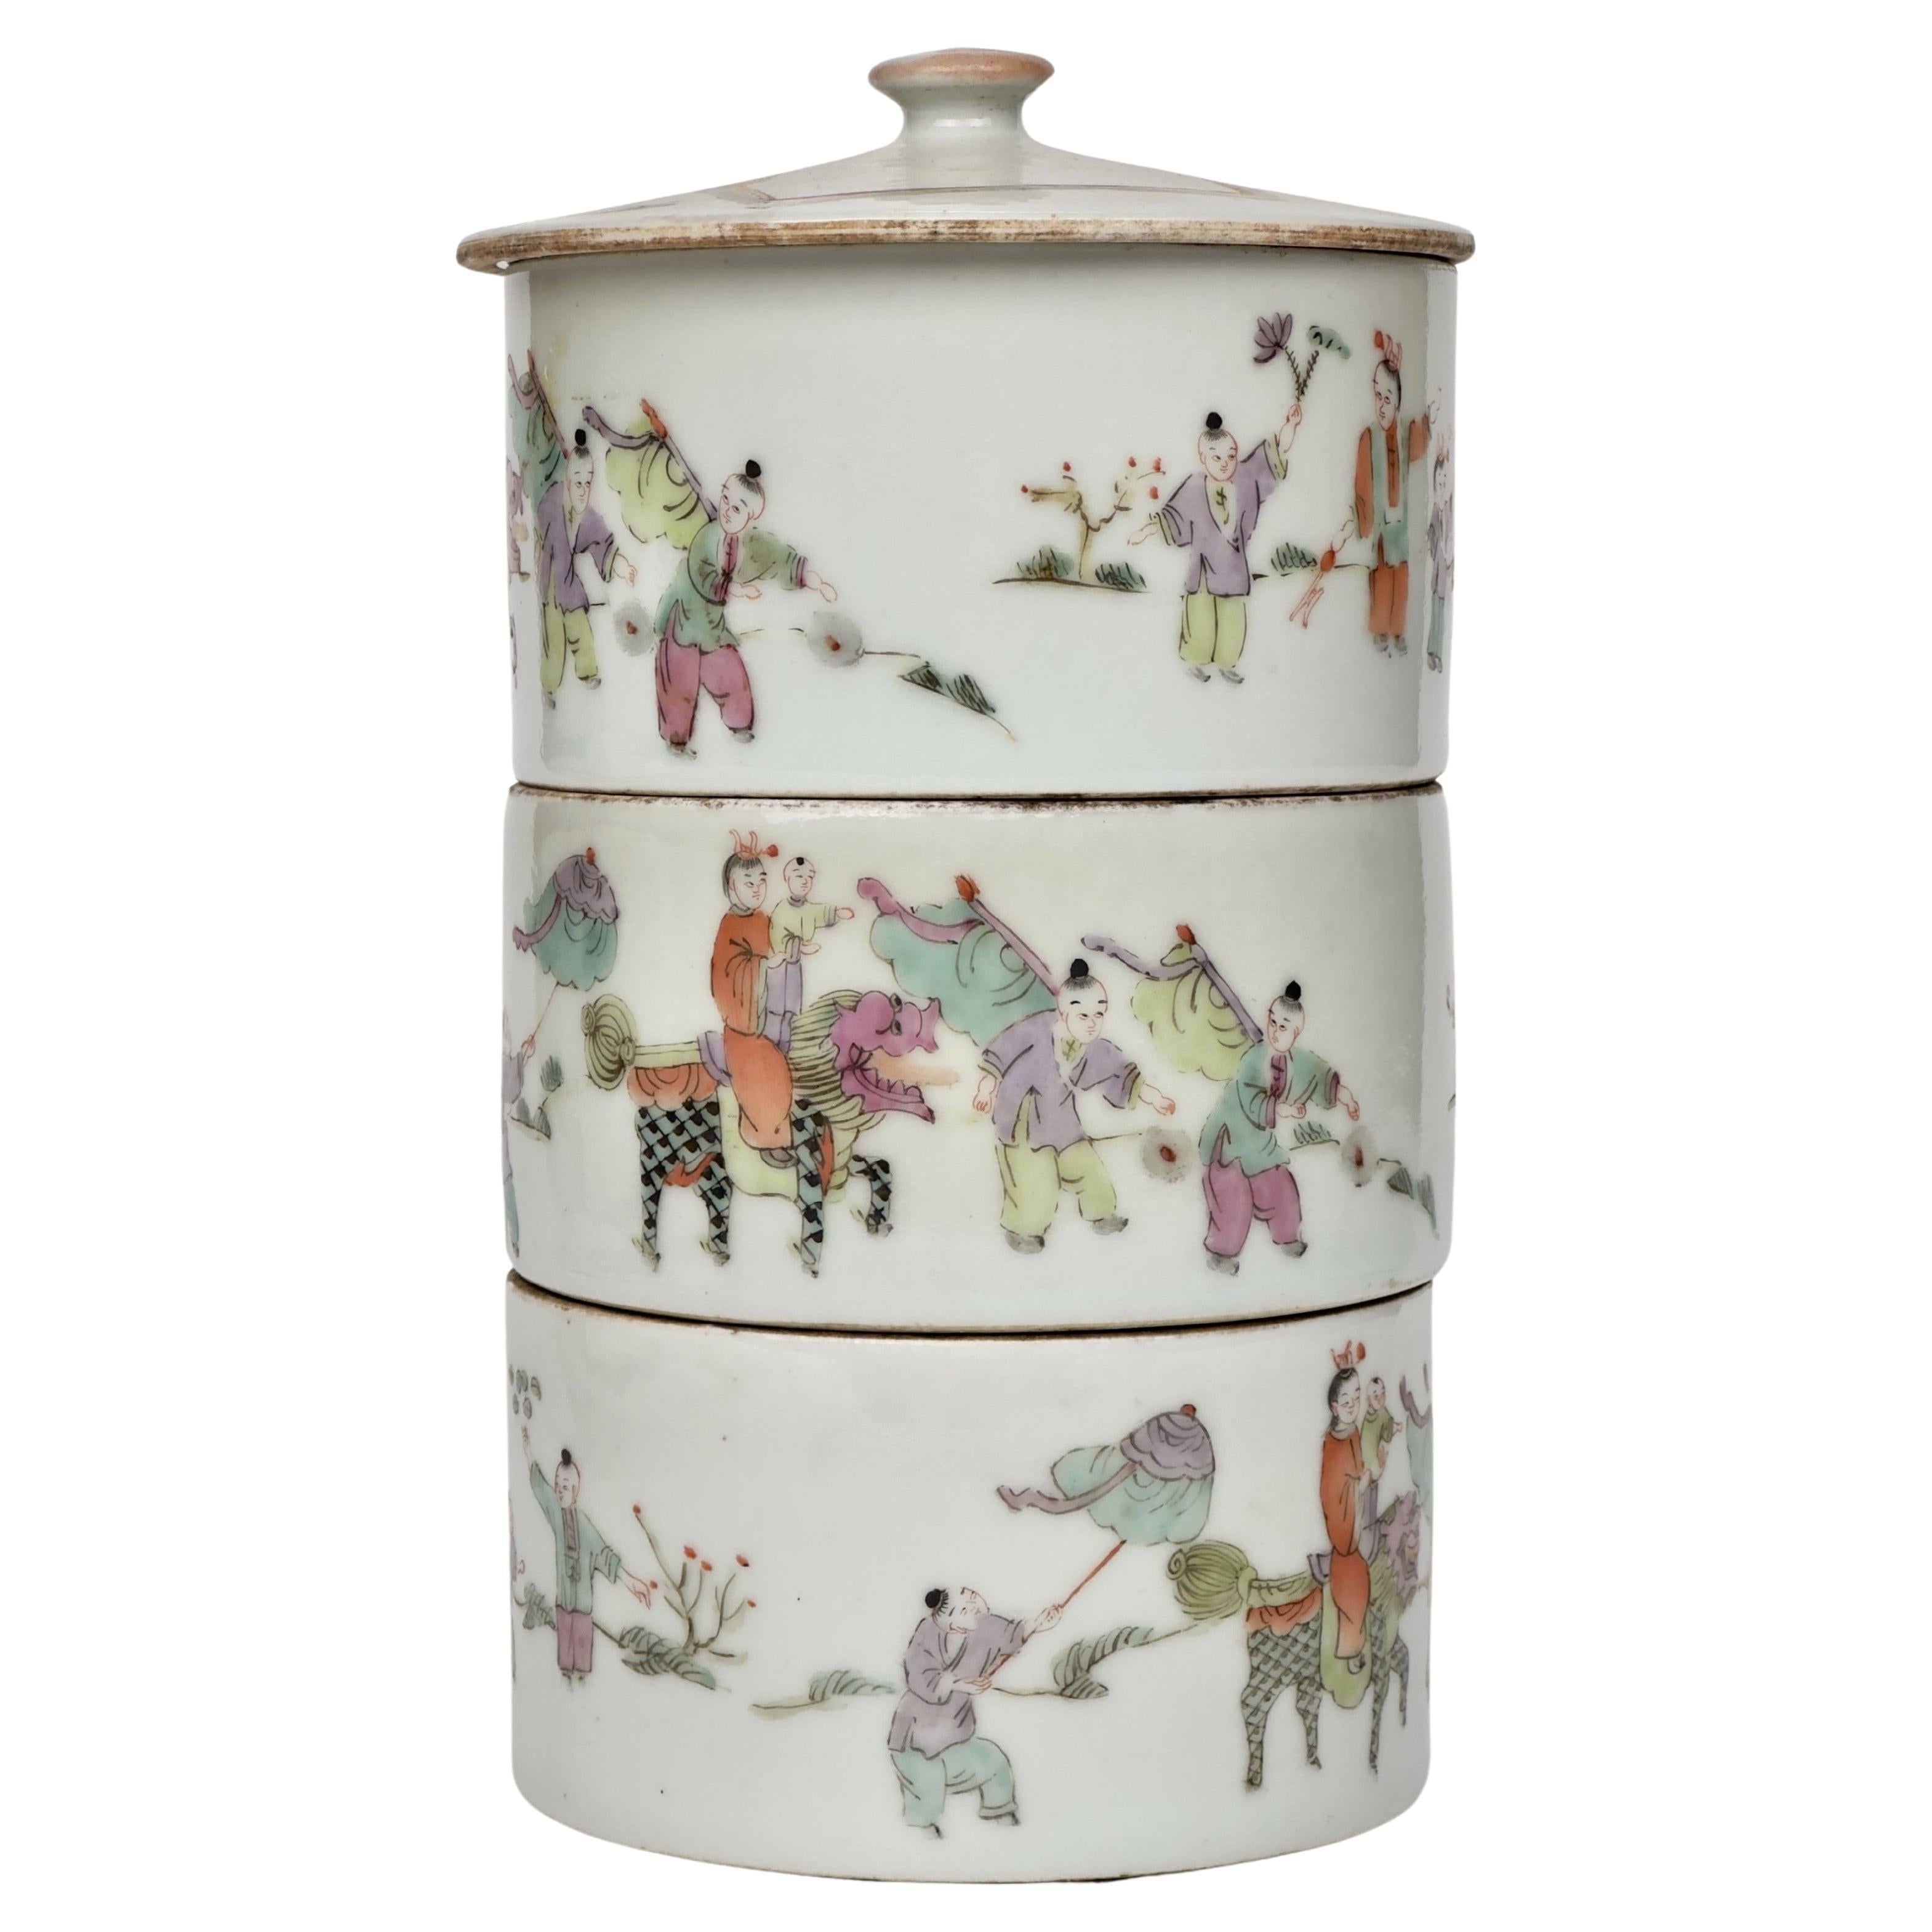 Chinese Famille Rose Porcelain Stacking Box, Late Qing Period